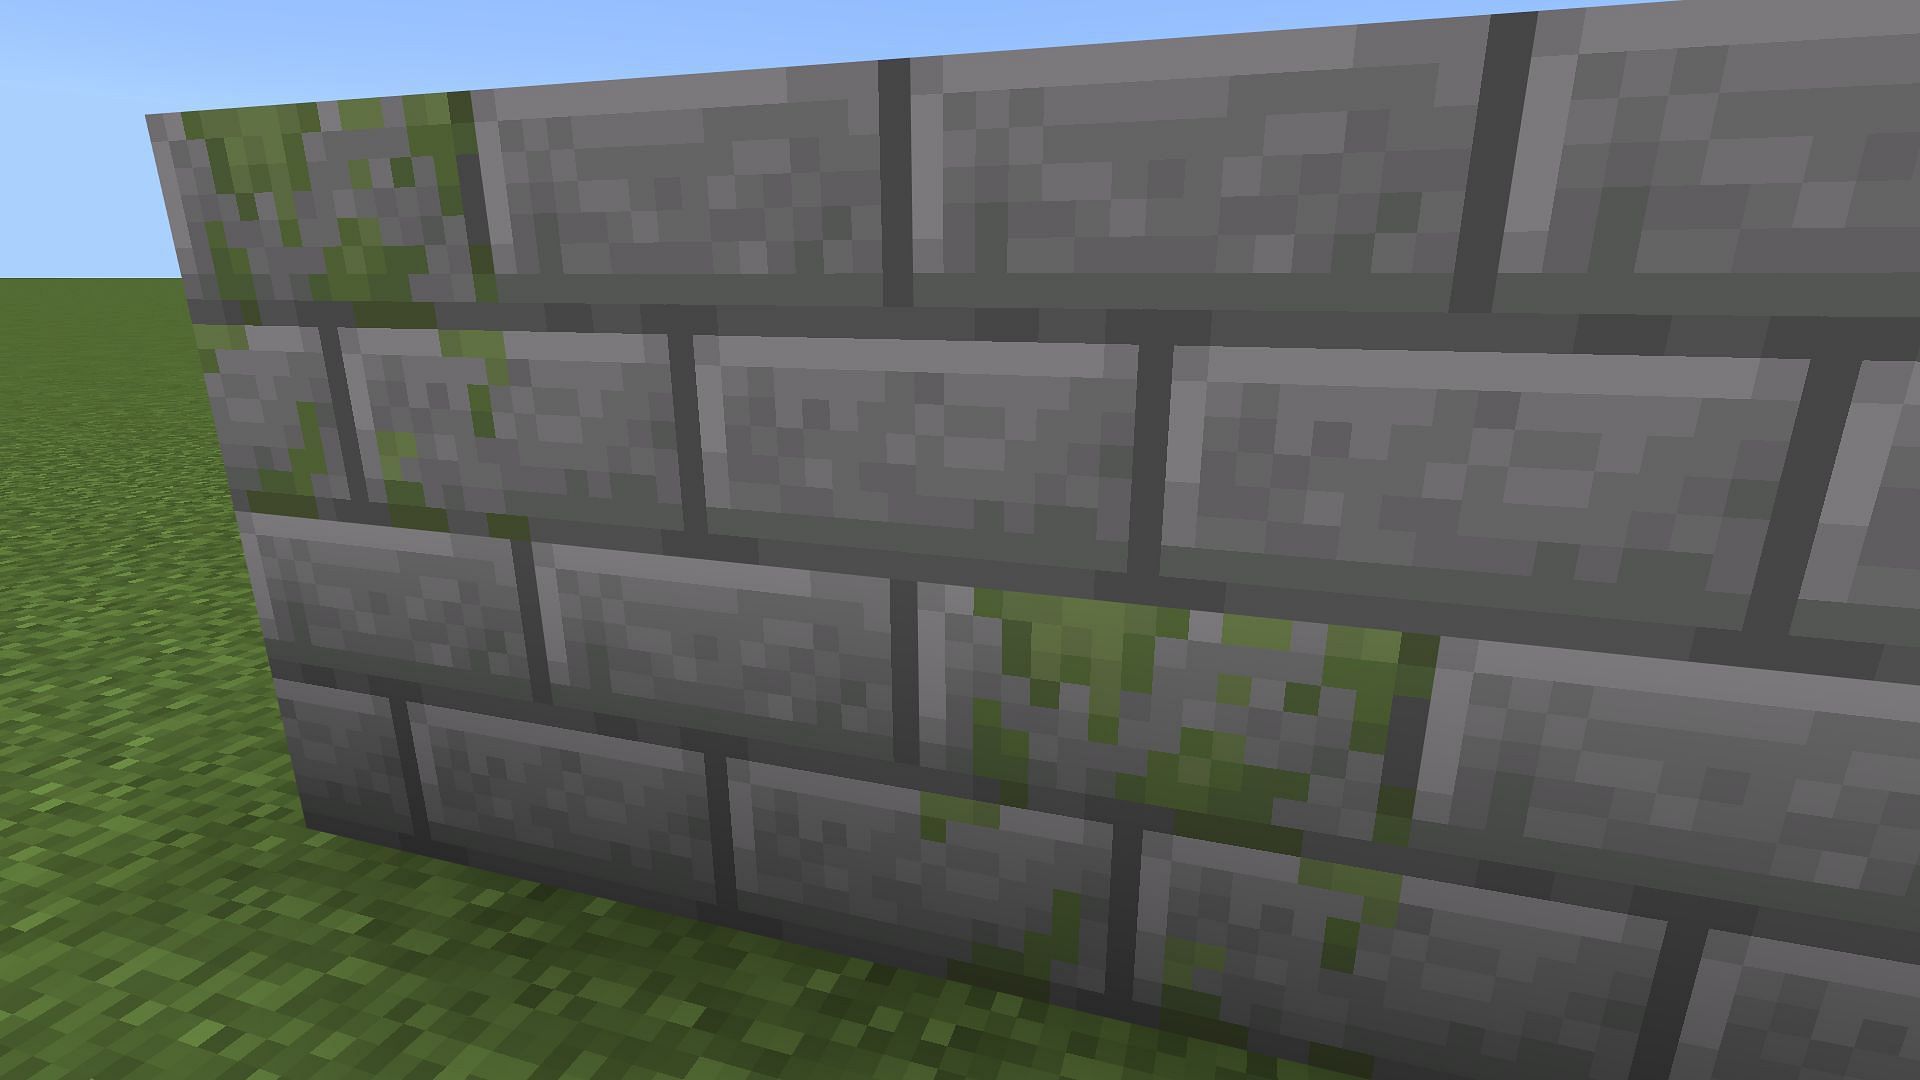 Mossy stone bricks can be added with regular stone bricks for aging a Minecraft structure (Image via Mojang)